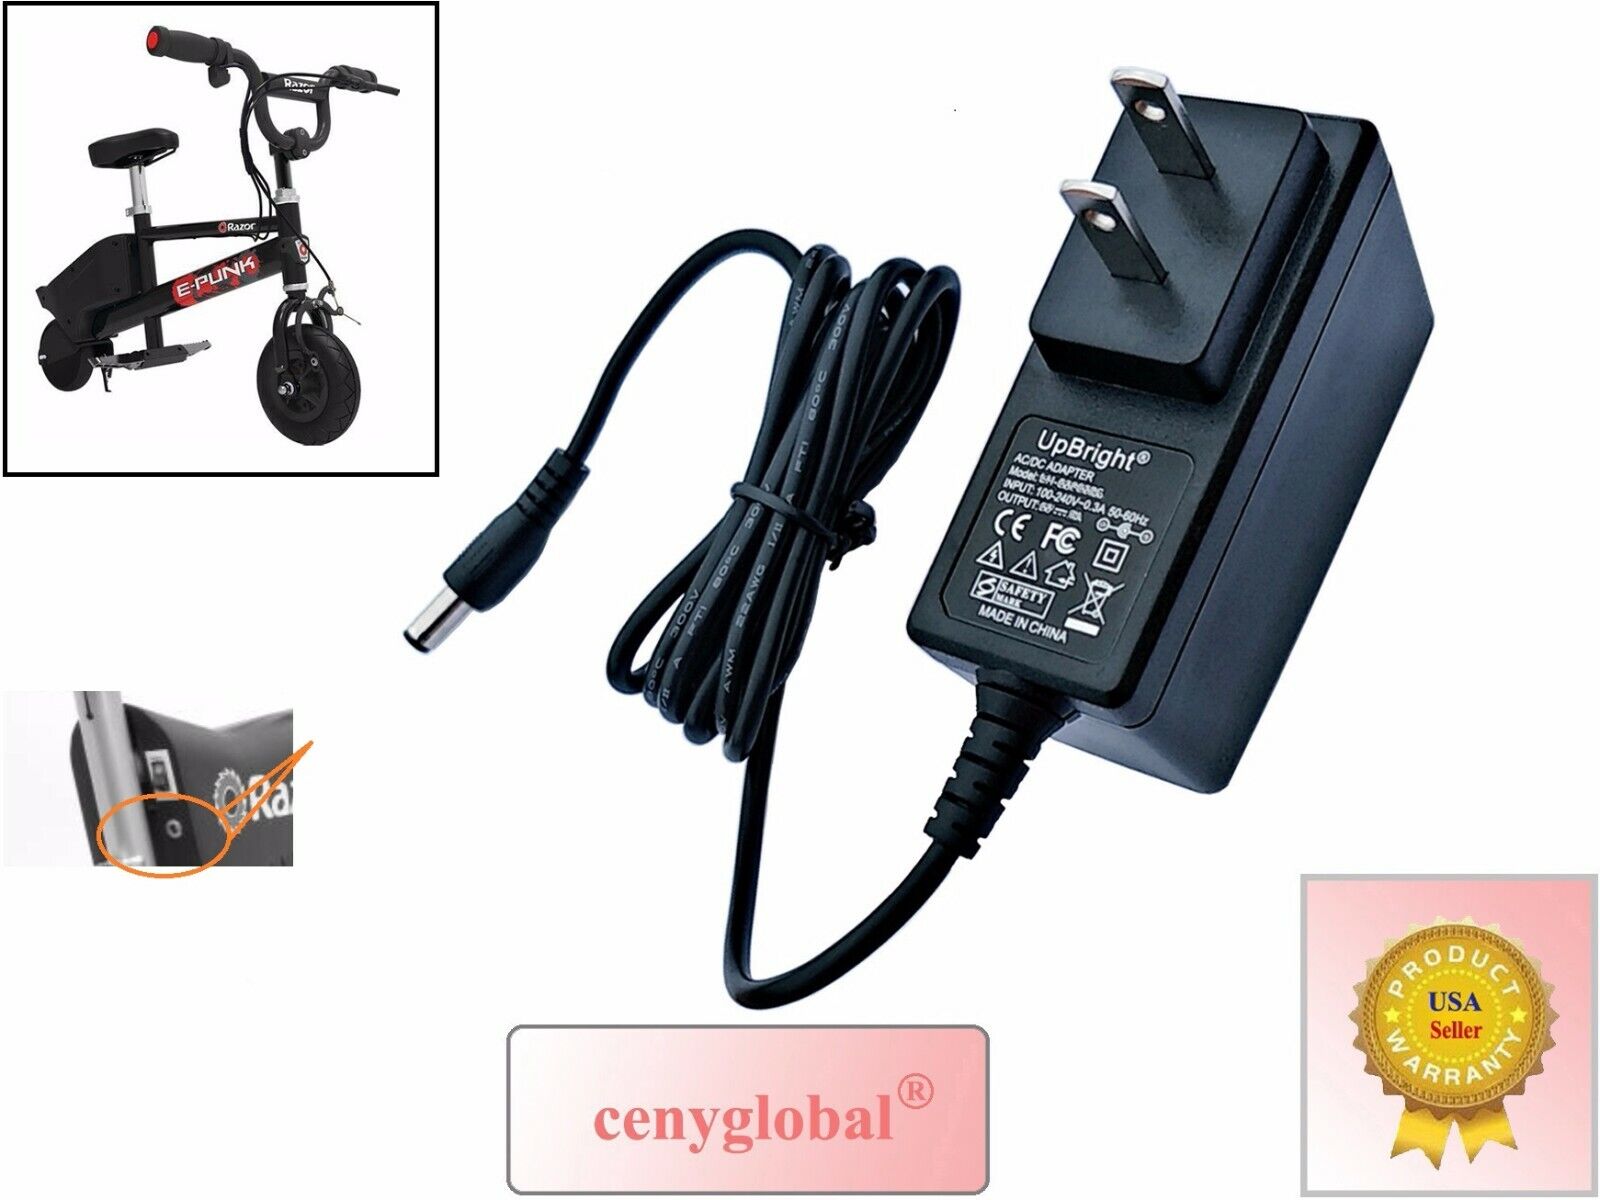 12V AC Adapter for Razor E-Punk Scooter Electric Bike Has Auto Shut Off Charger